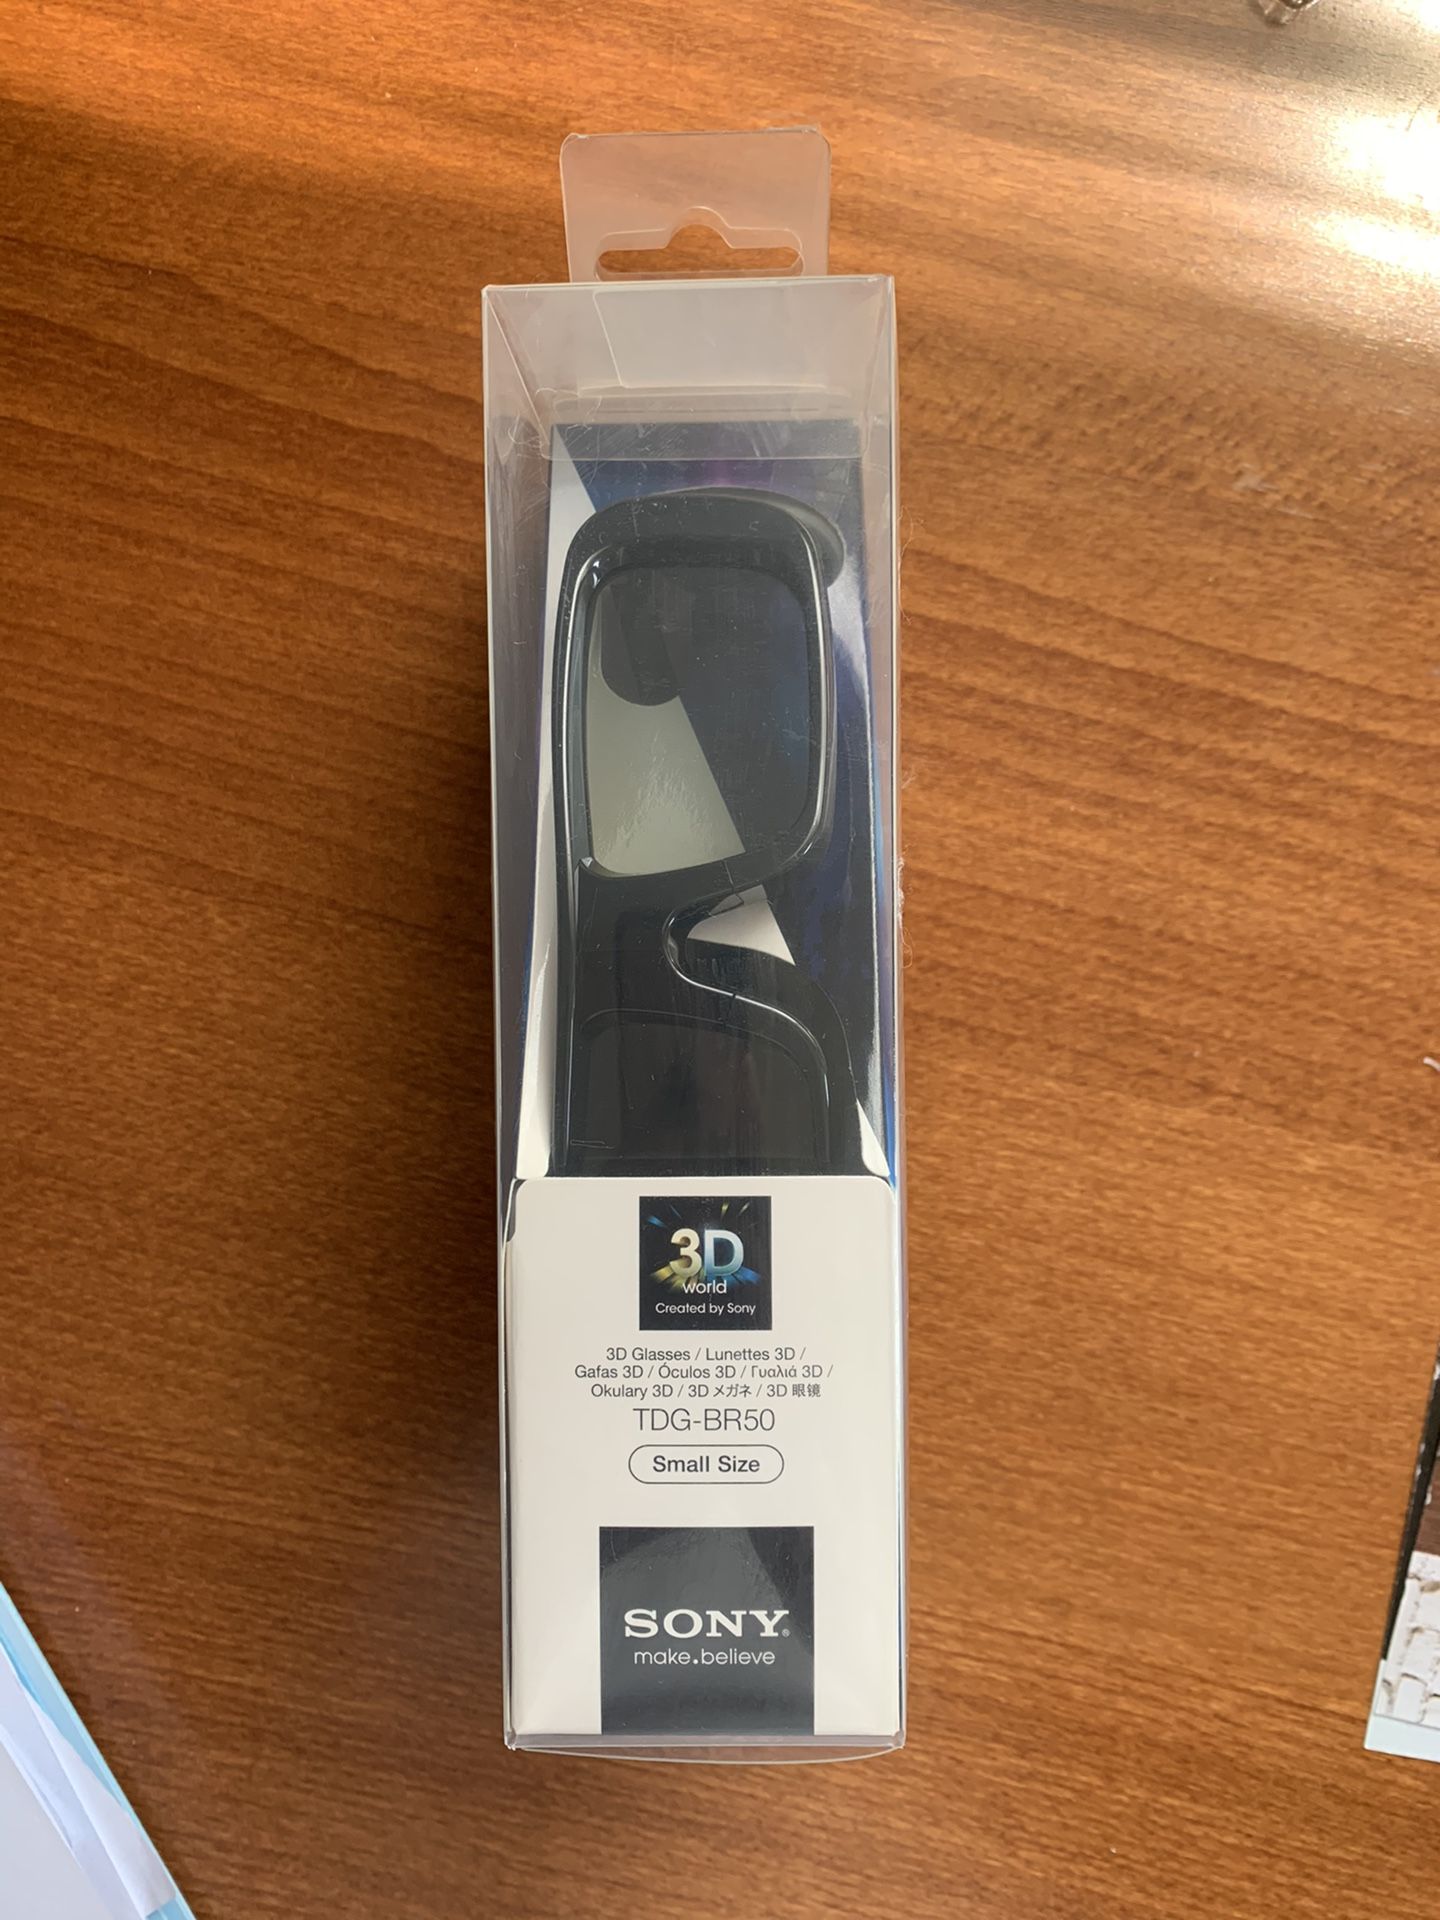 Sony TDG-BR50 3D Active Glasses (Small Size) - Brand new, sealed